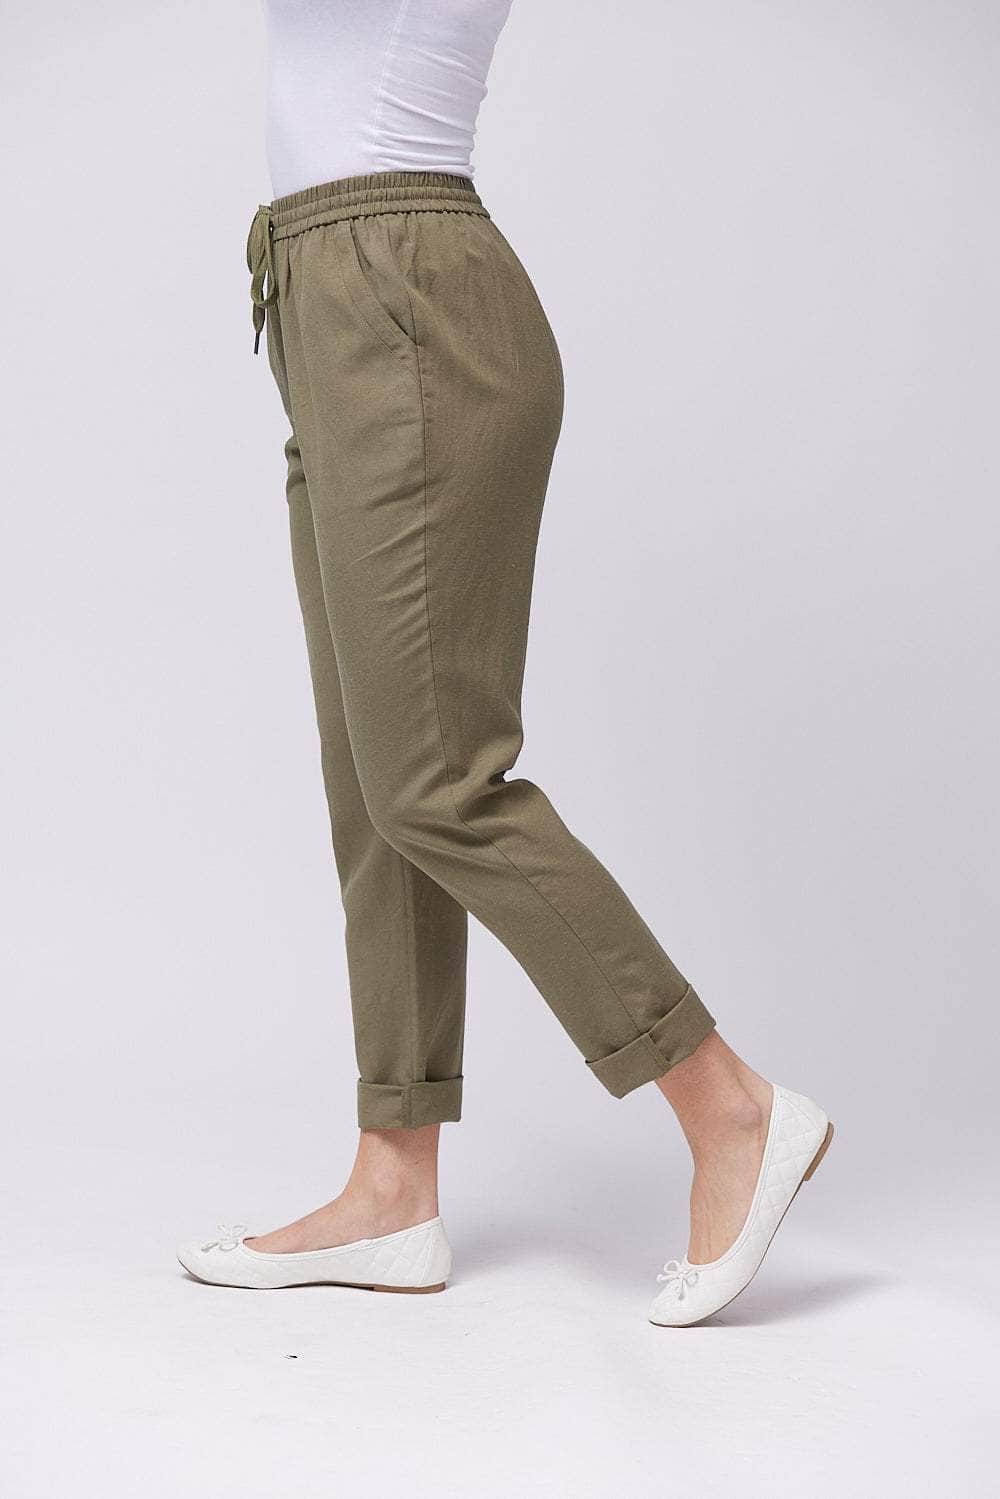 Saloos Trousers 7191-A